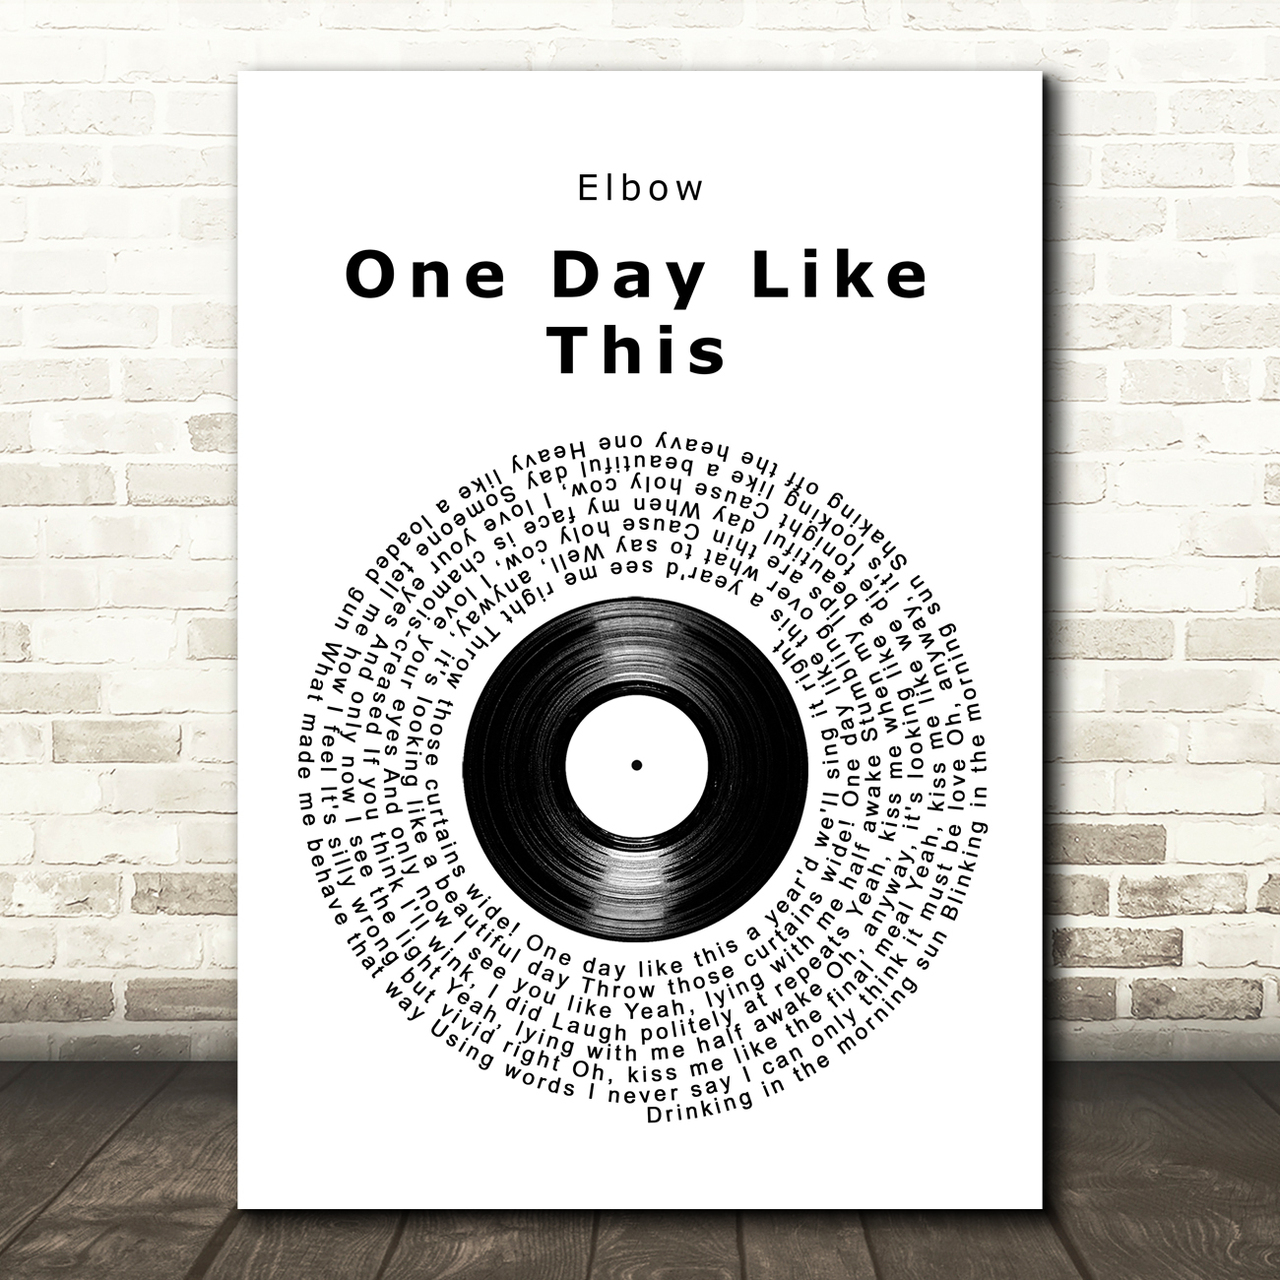 Elbow One Day Like This Vinyl Record Song Lyric Art Print